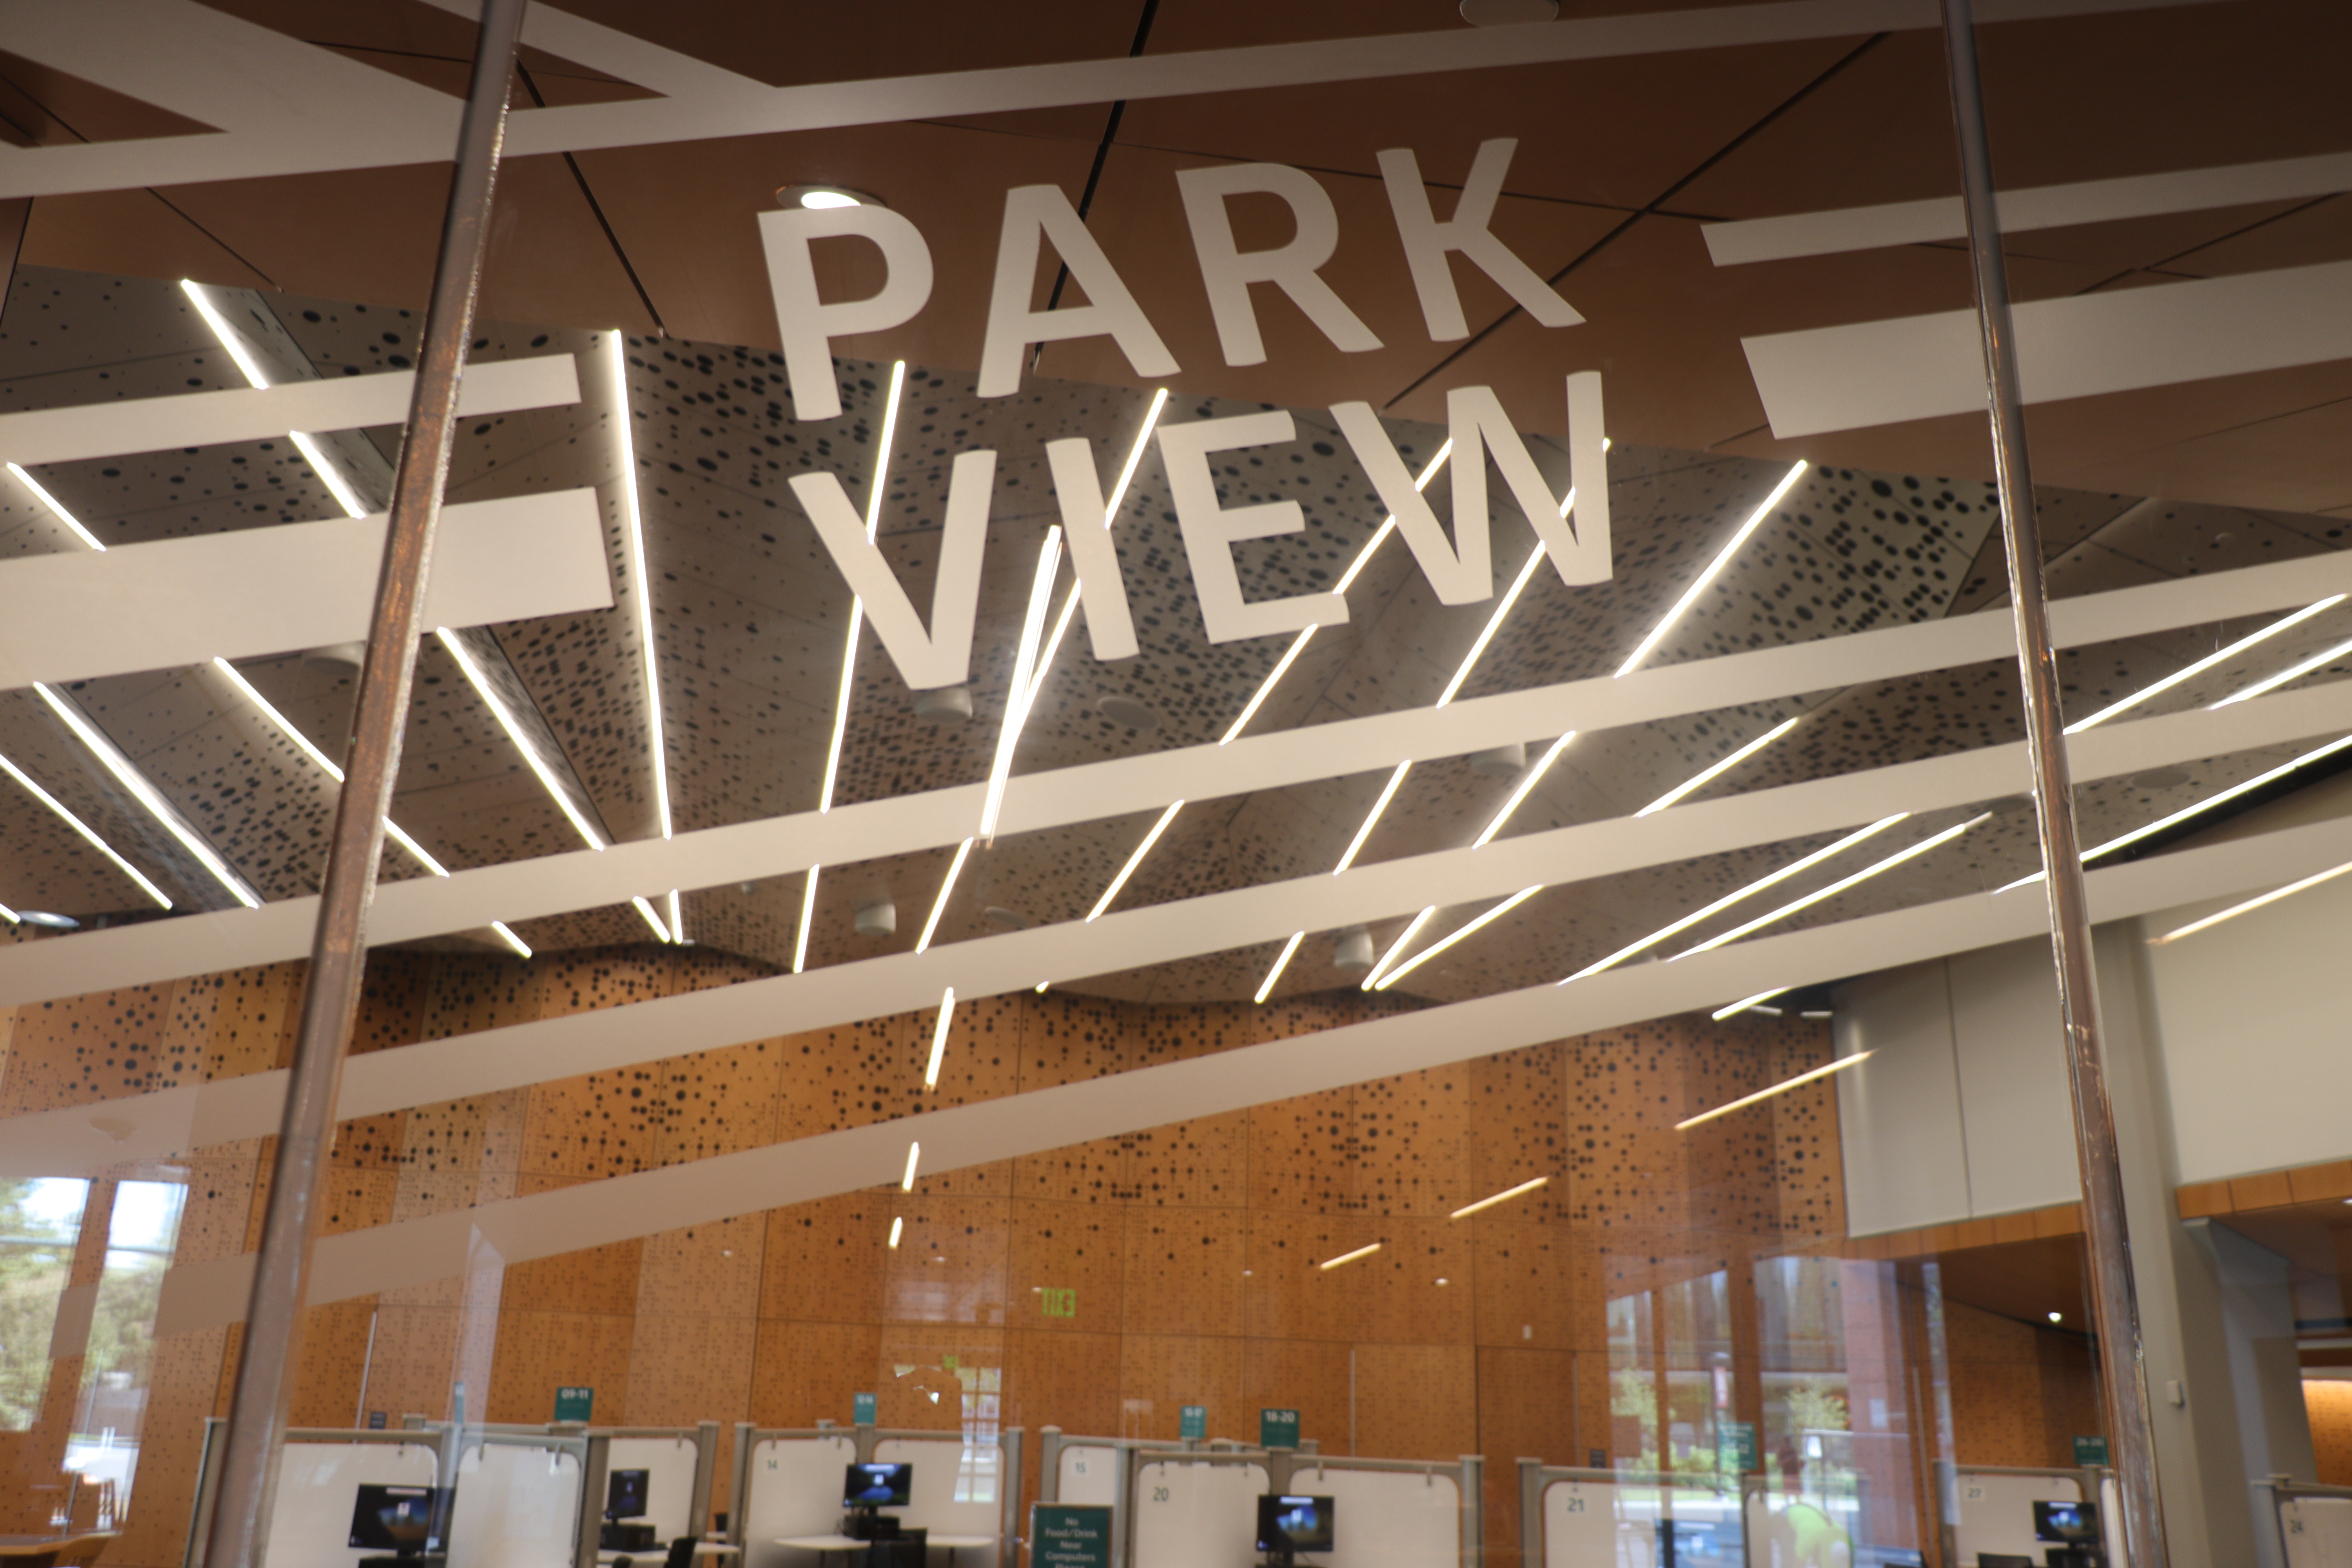 Etched glass with the words "Park View". Behind the glass is a view of the new event space.